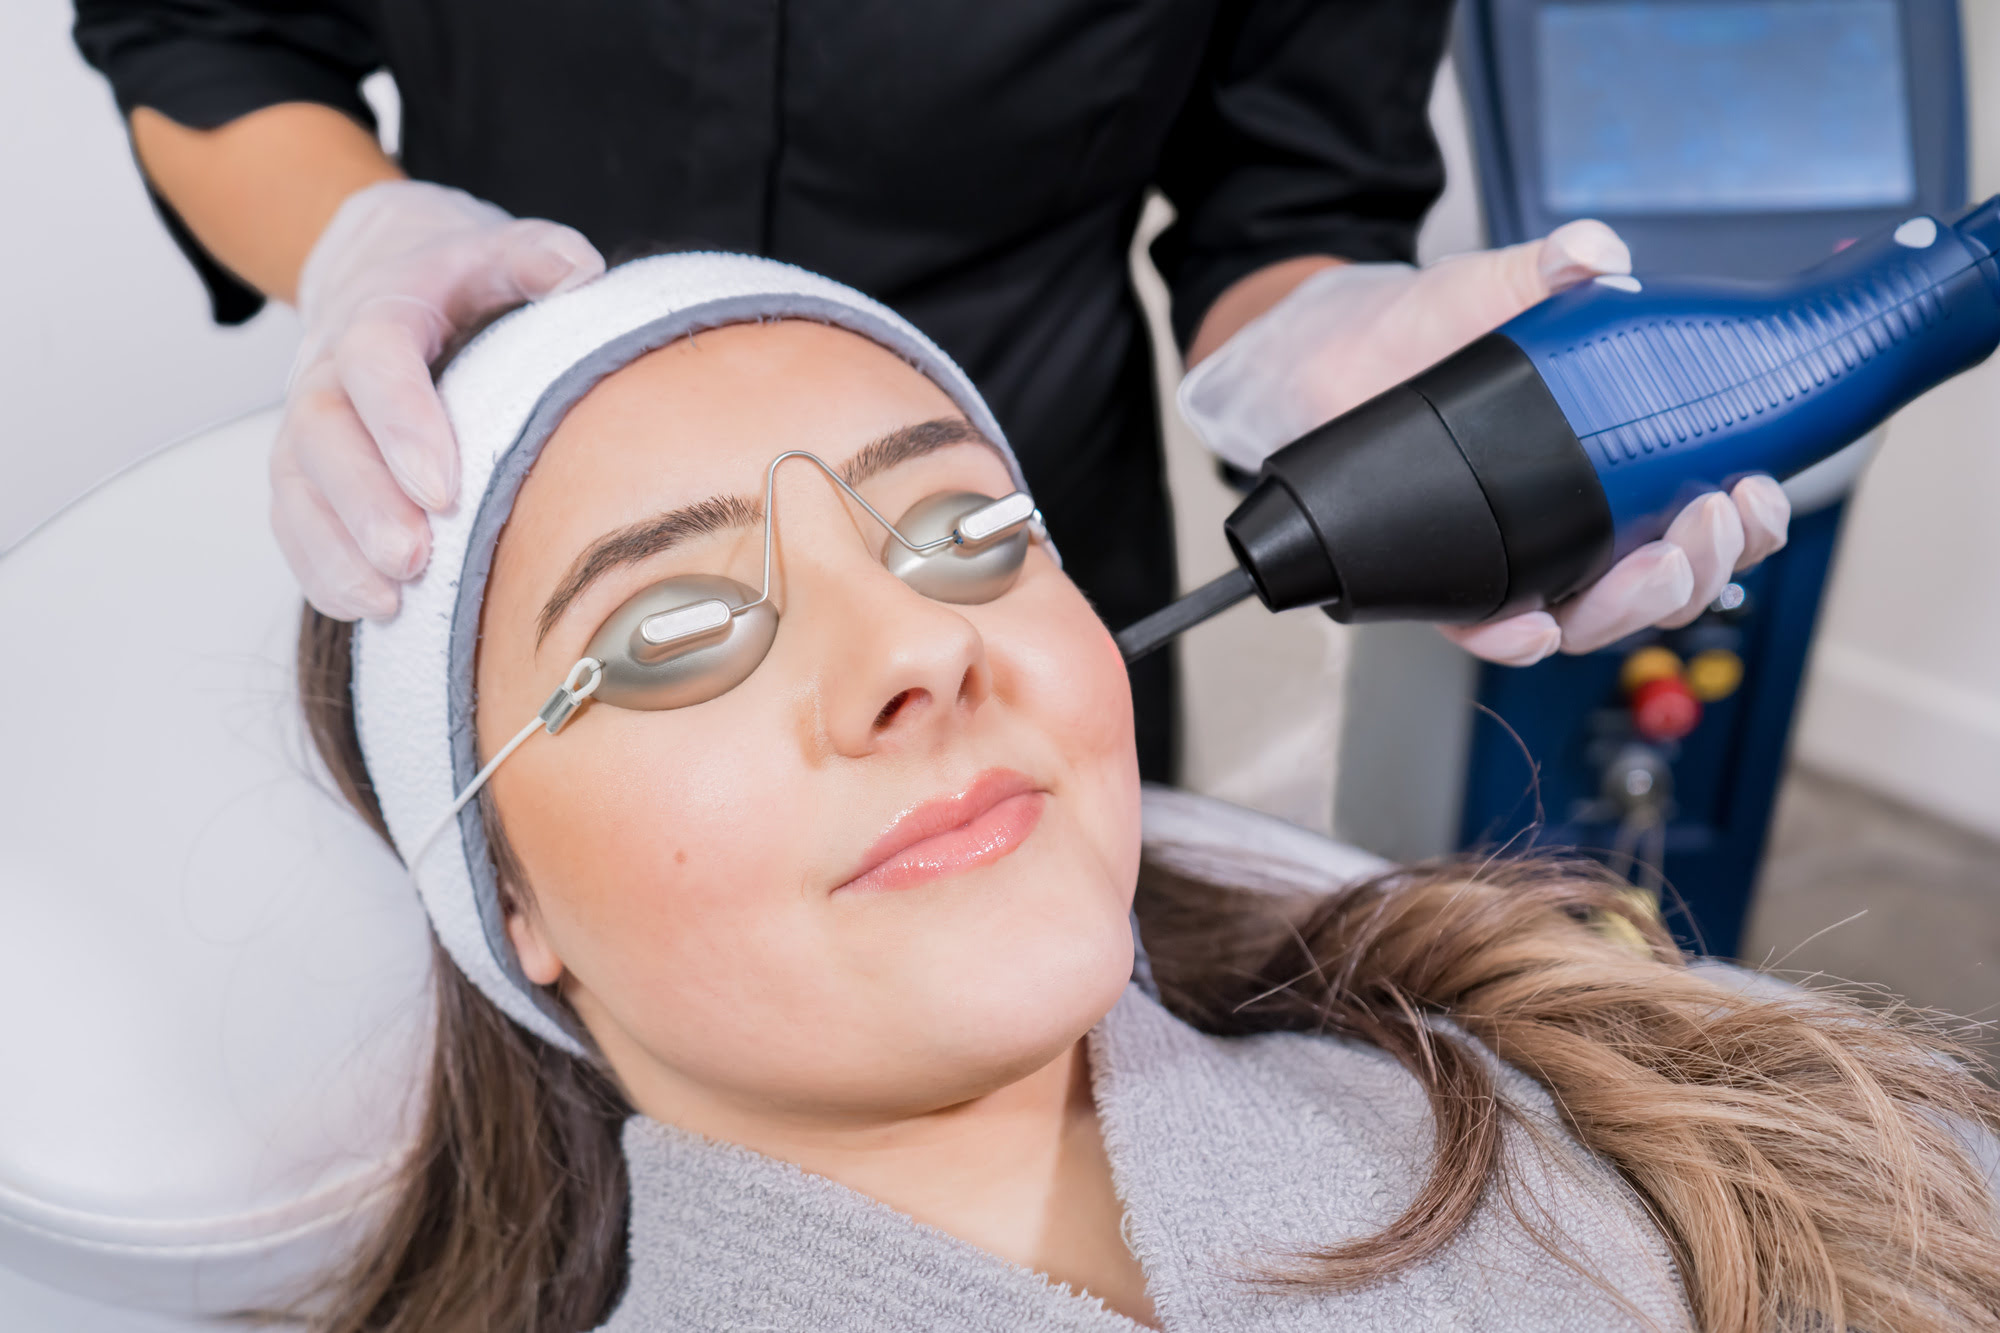 Anti aging cosmetology and beauty treatment product, woman using laser device for skin resurfacing as rejuvenation procedure and skincare routine | Coral Springs Med Spa in Coral Springs, FL